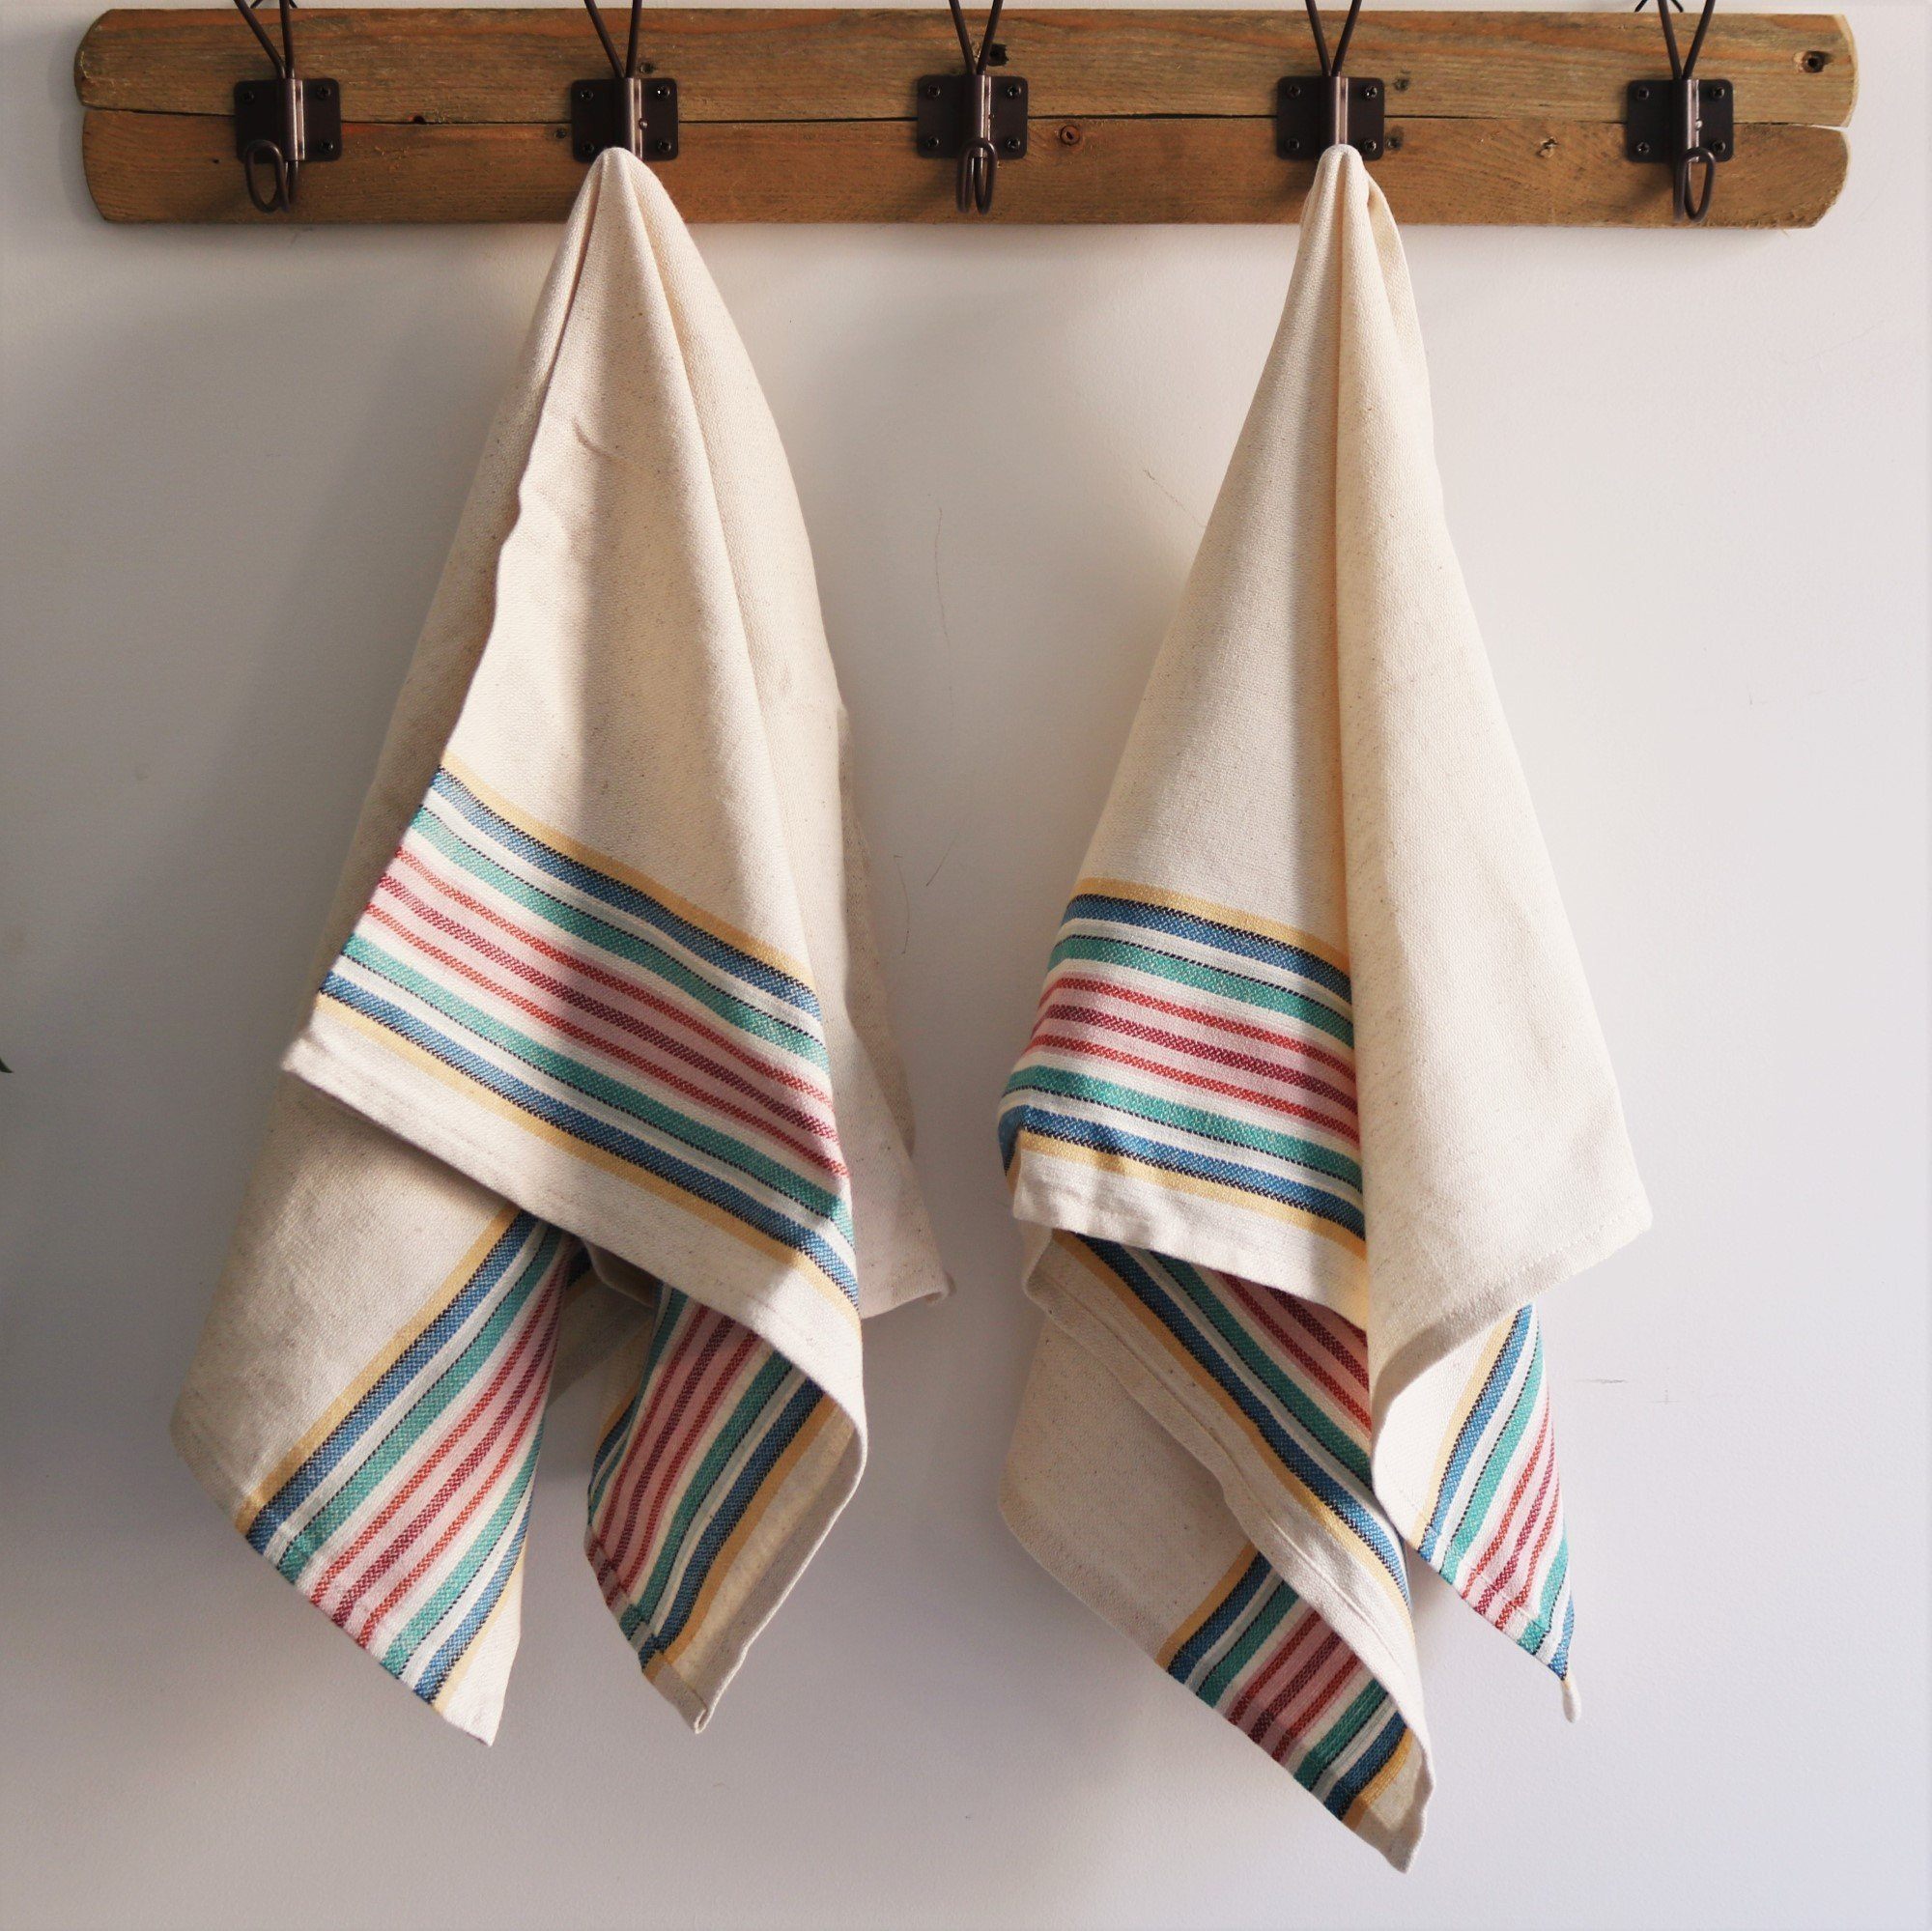 Sky Turkish Hand Towels | Ethically Made & Sustainable | 100% Turkish Cotton by Anatolico